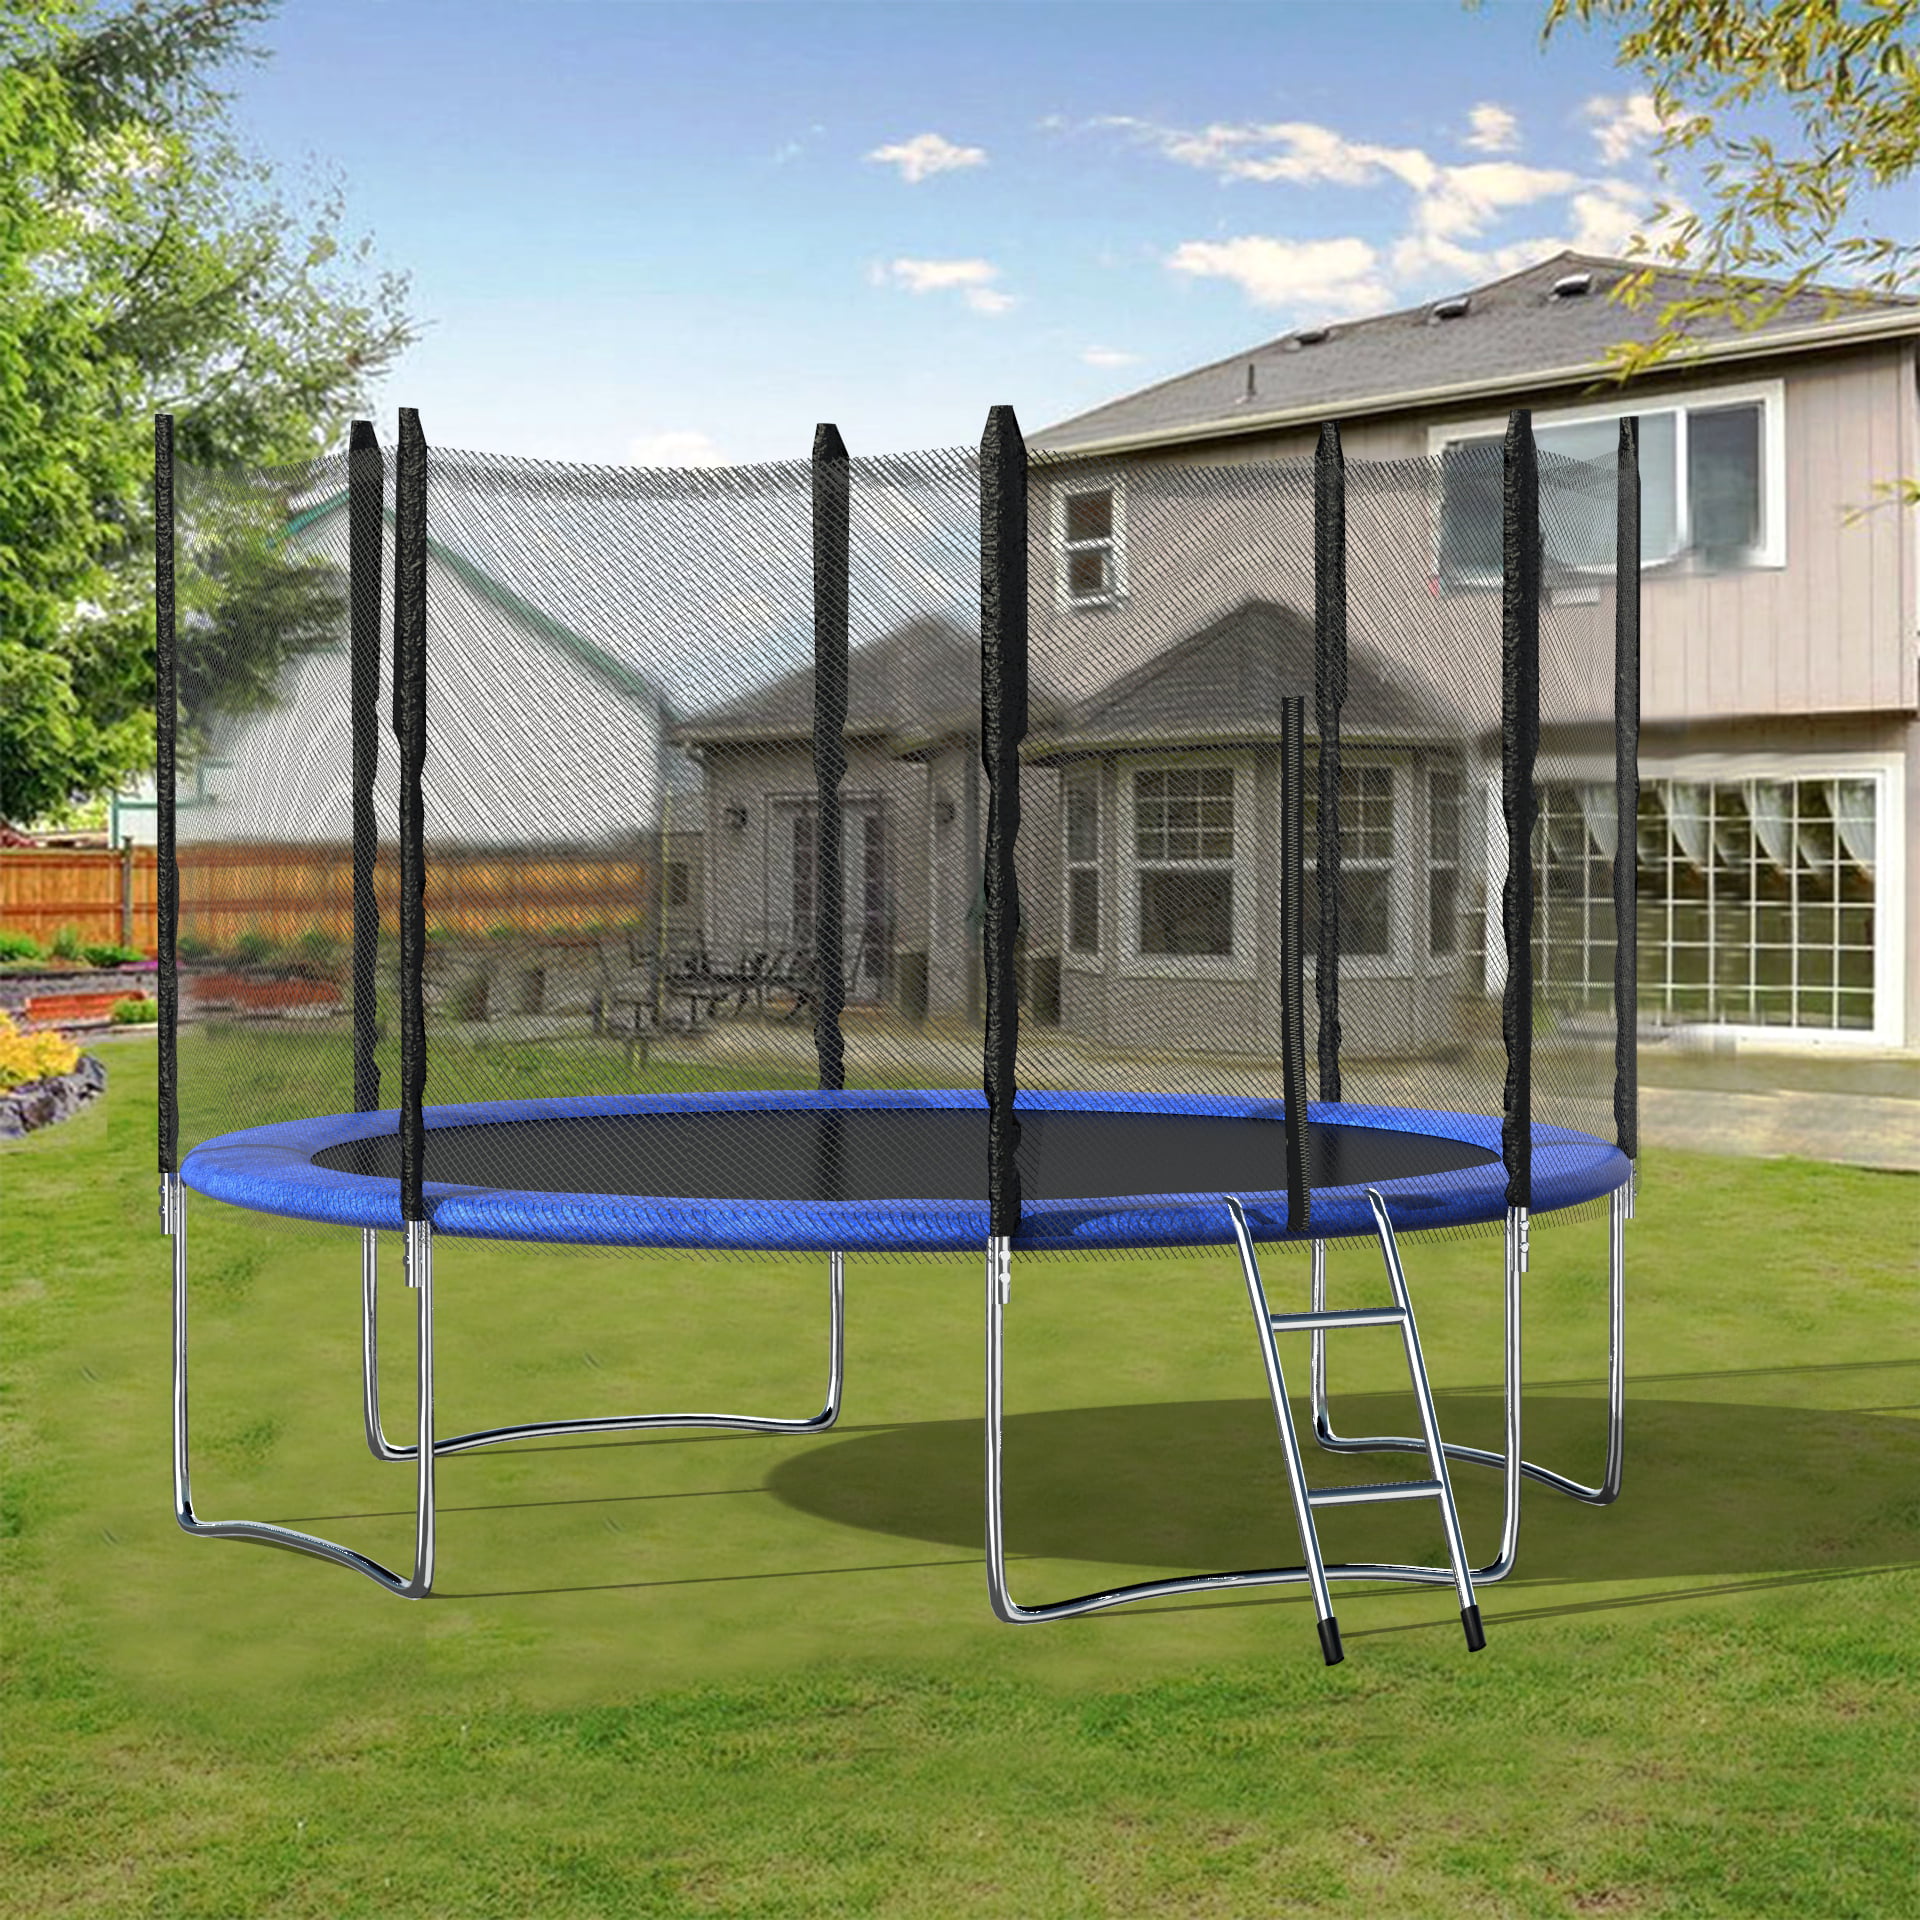 Spring Pad Jumping Mat and Durable Springs -Made to Last- Jump & Bounce Outdoor Fun Family Entertainment Trampoline 8ft / 10ft / 12ft / 14ft AbarQs Premium garden & fitness series Ladder Poles Safety Enclosure with special Net 